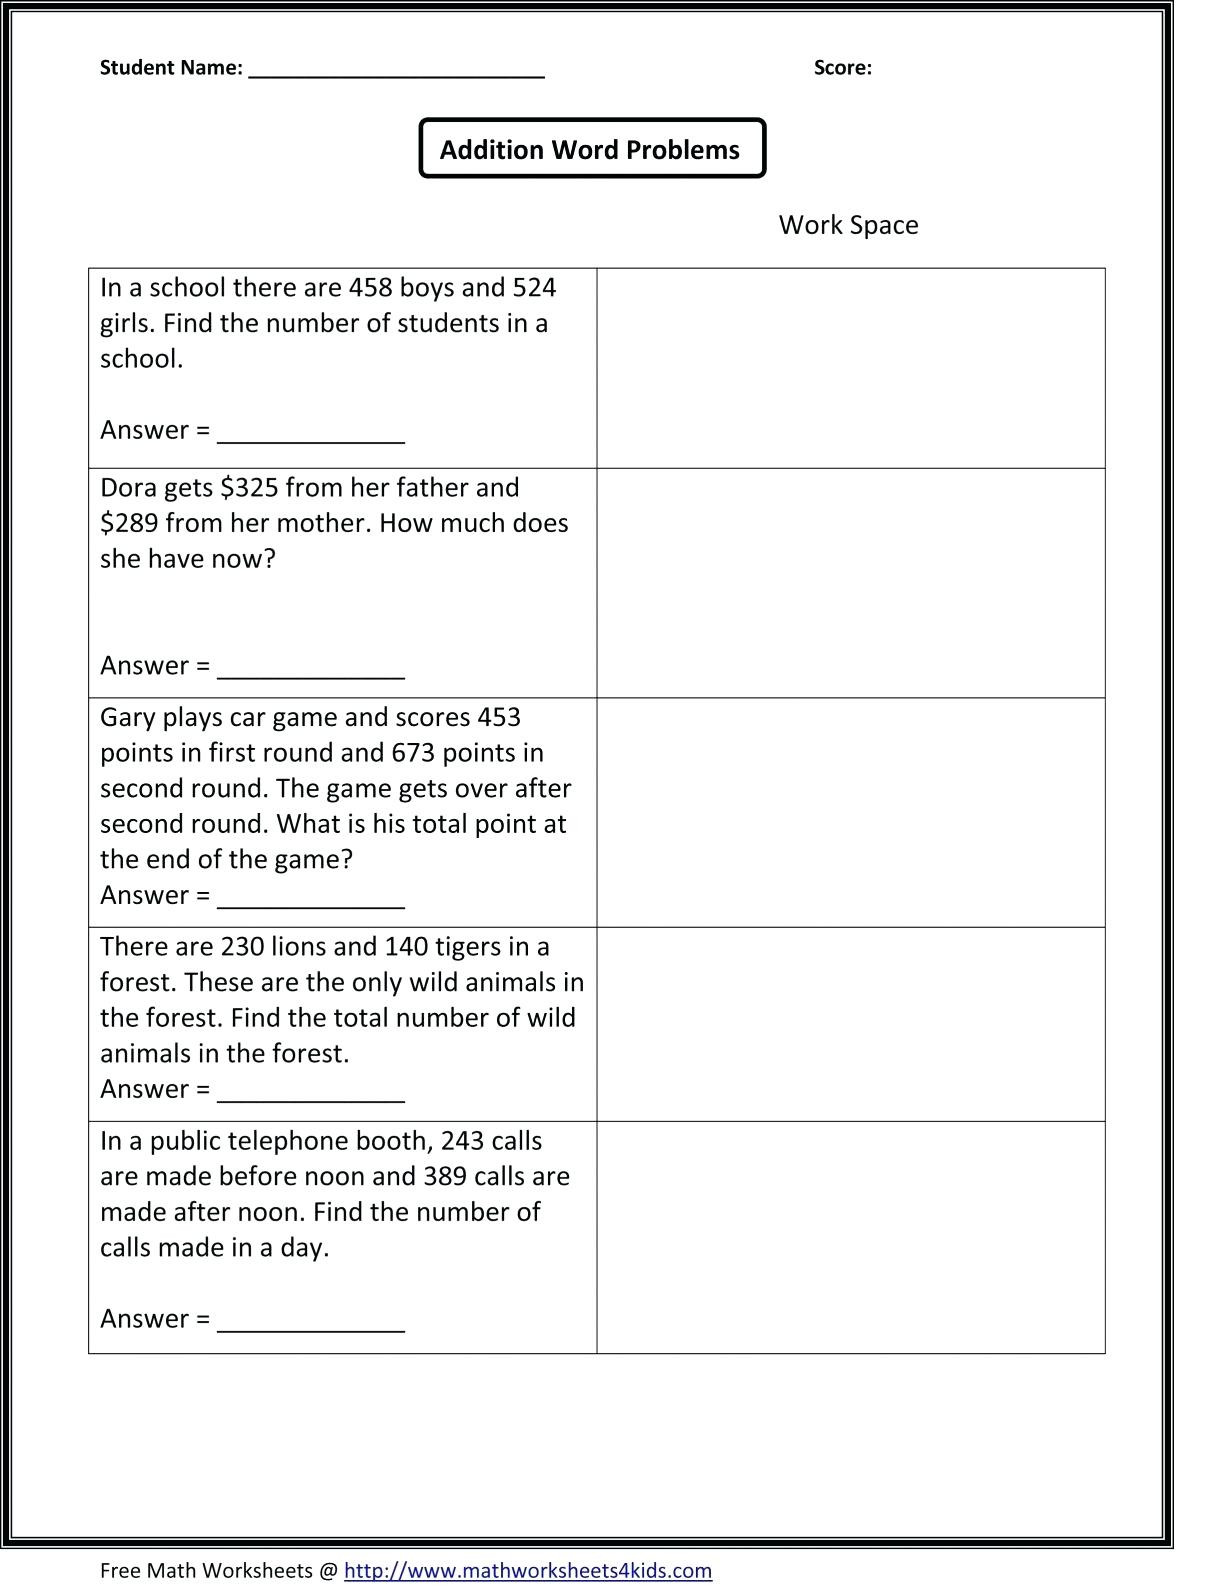 addition and subtraction word problems worksheets collection of solutions addition subtraction multiplication division worksheets for about grade math subtraction word addition and subtraction word pr